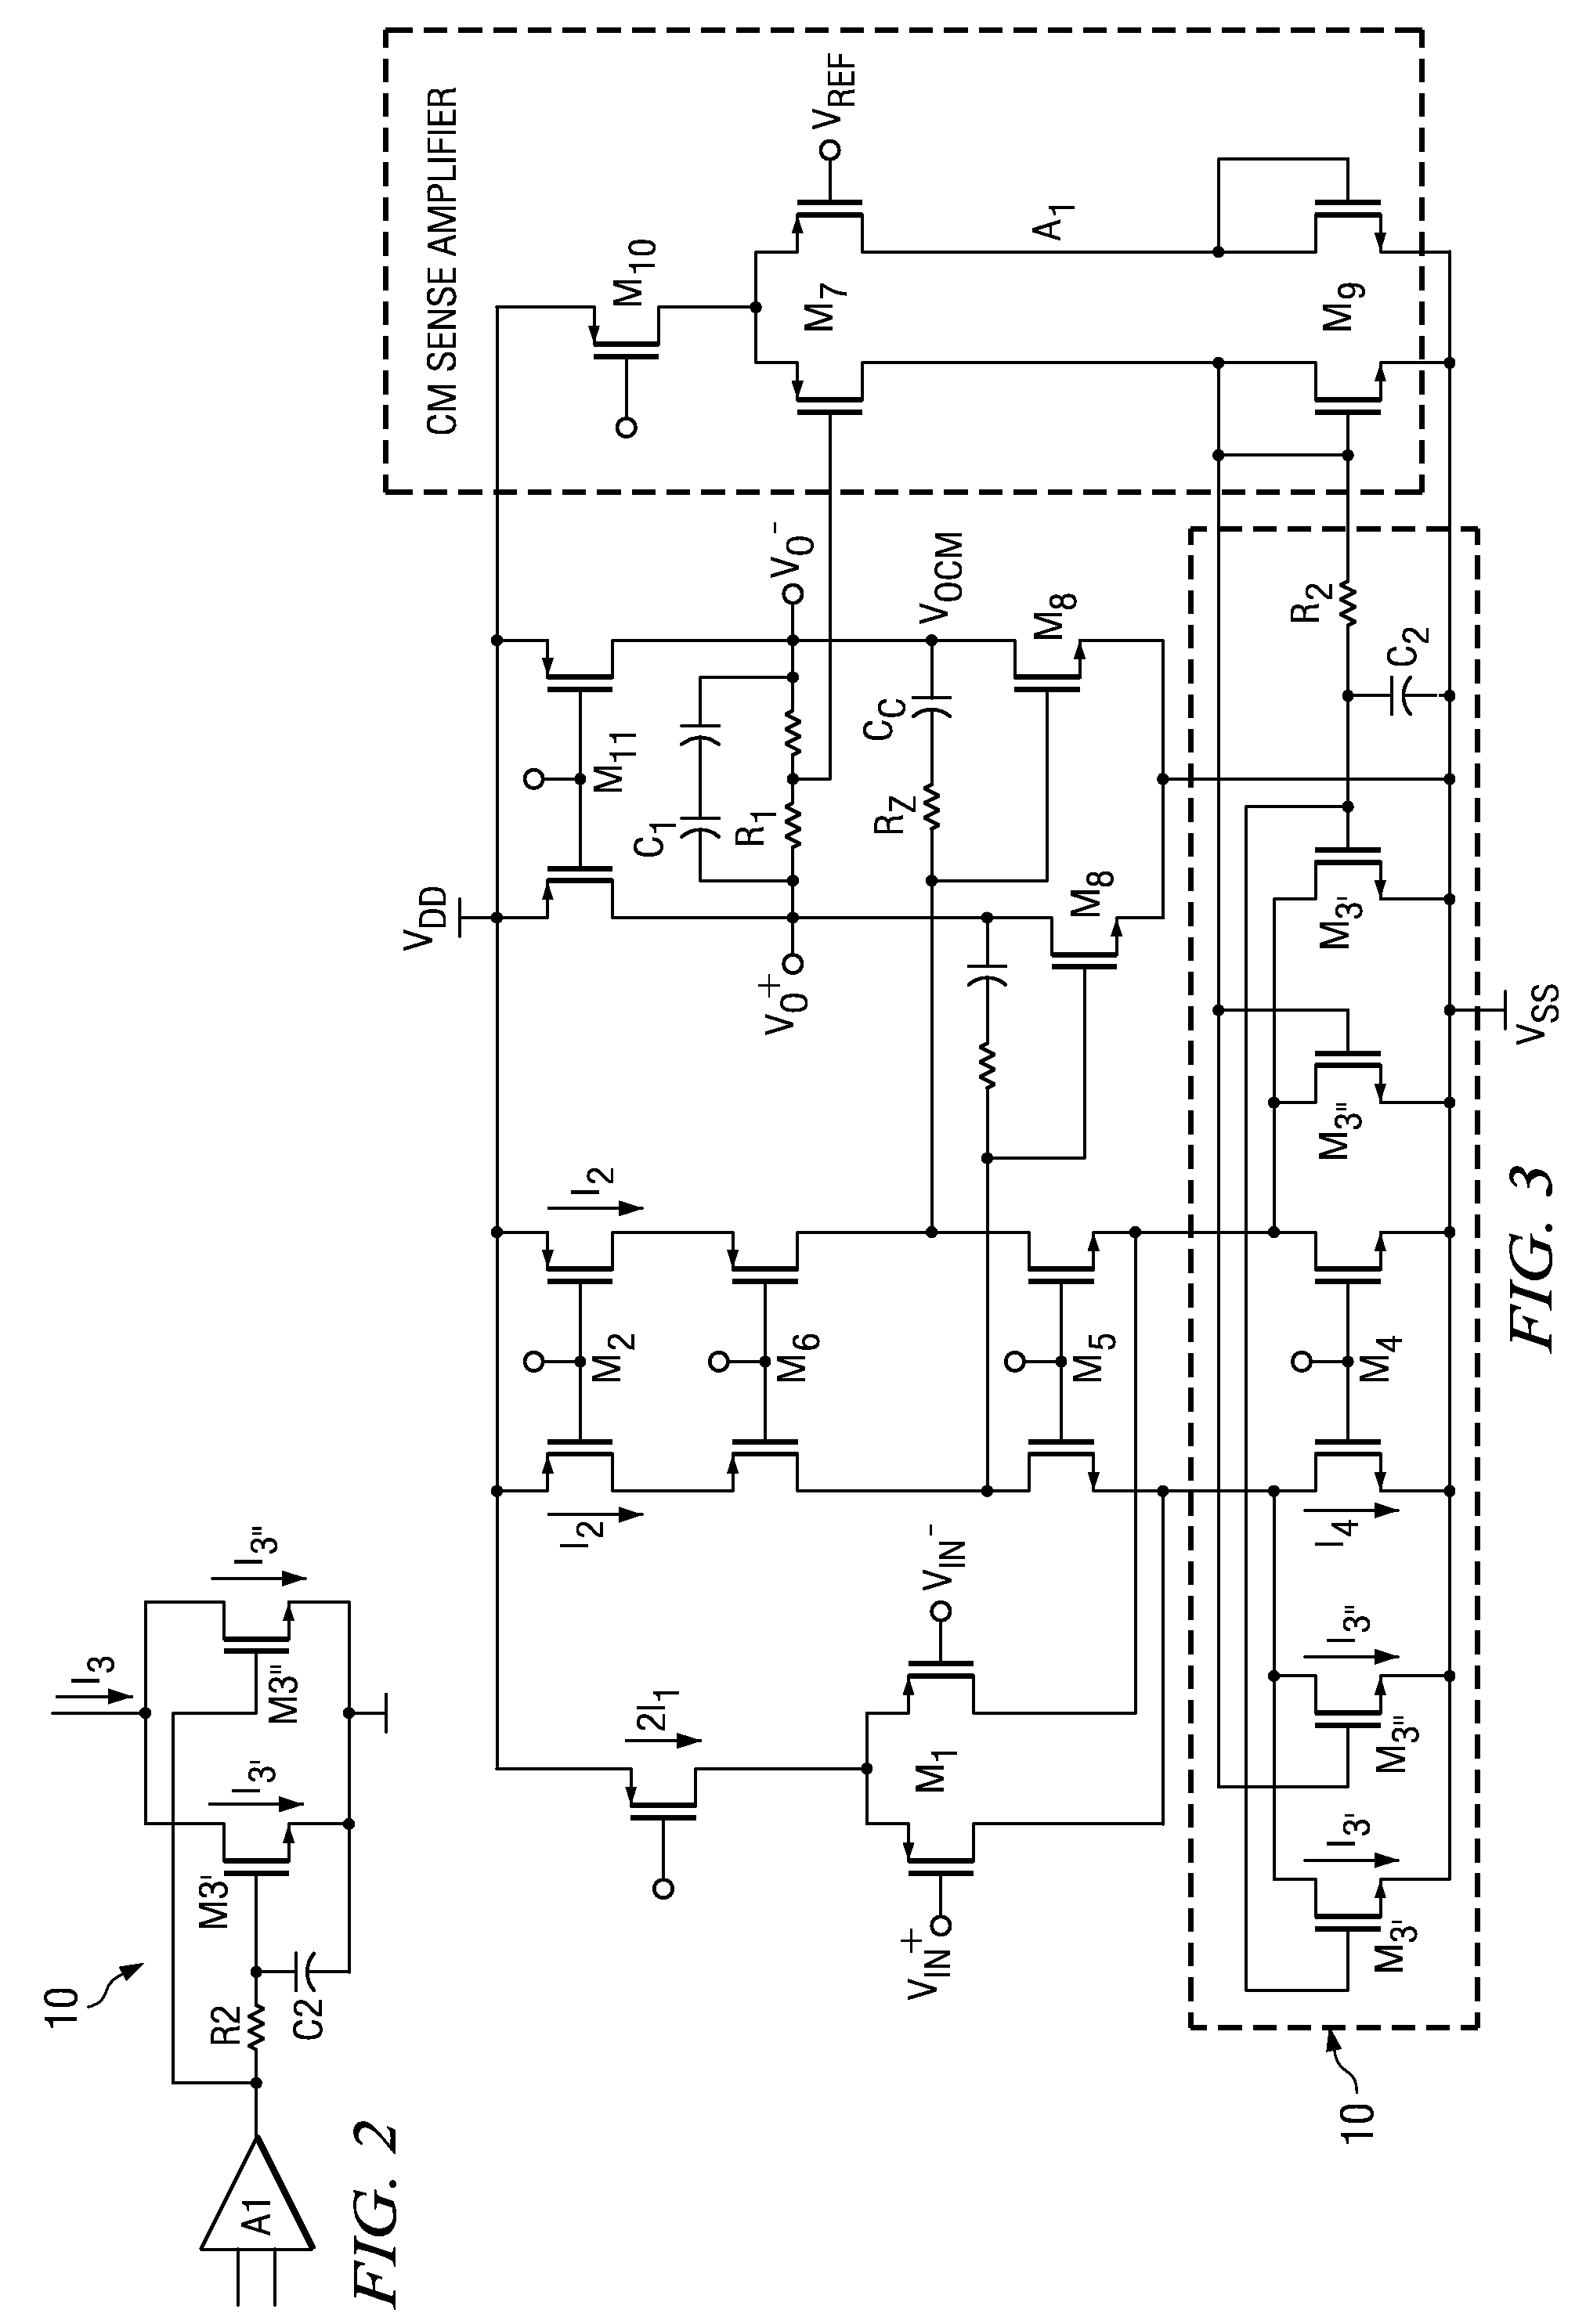 Multi-path common mode feedback for high speed multi-stage amplifiers